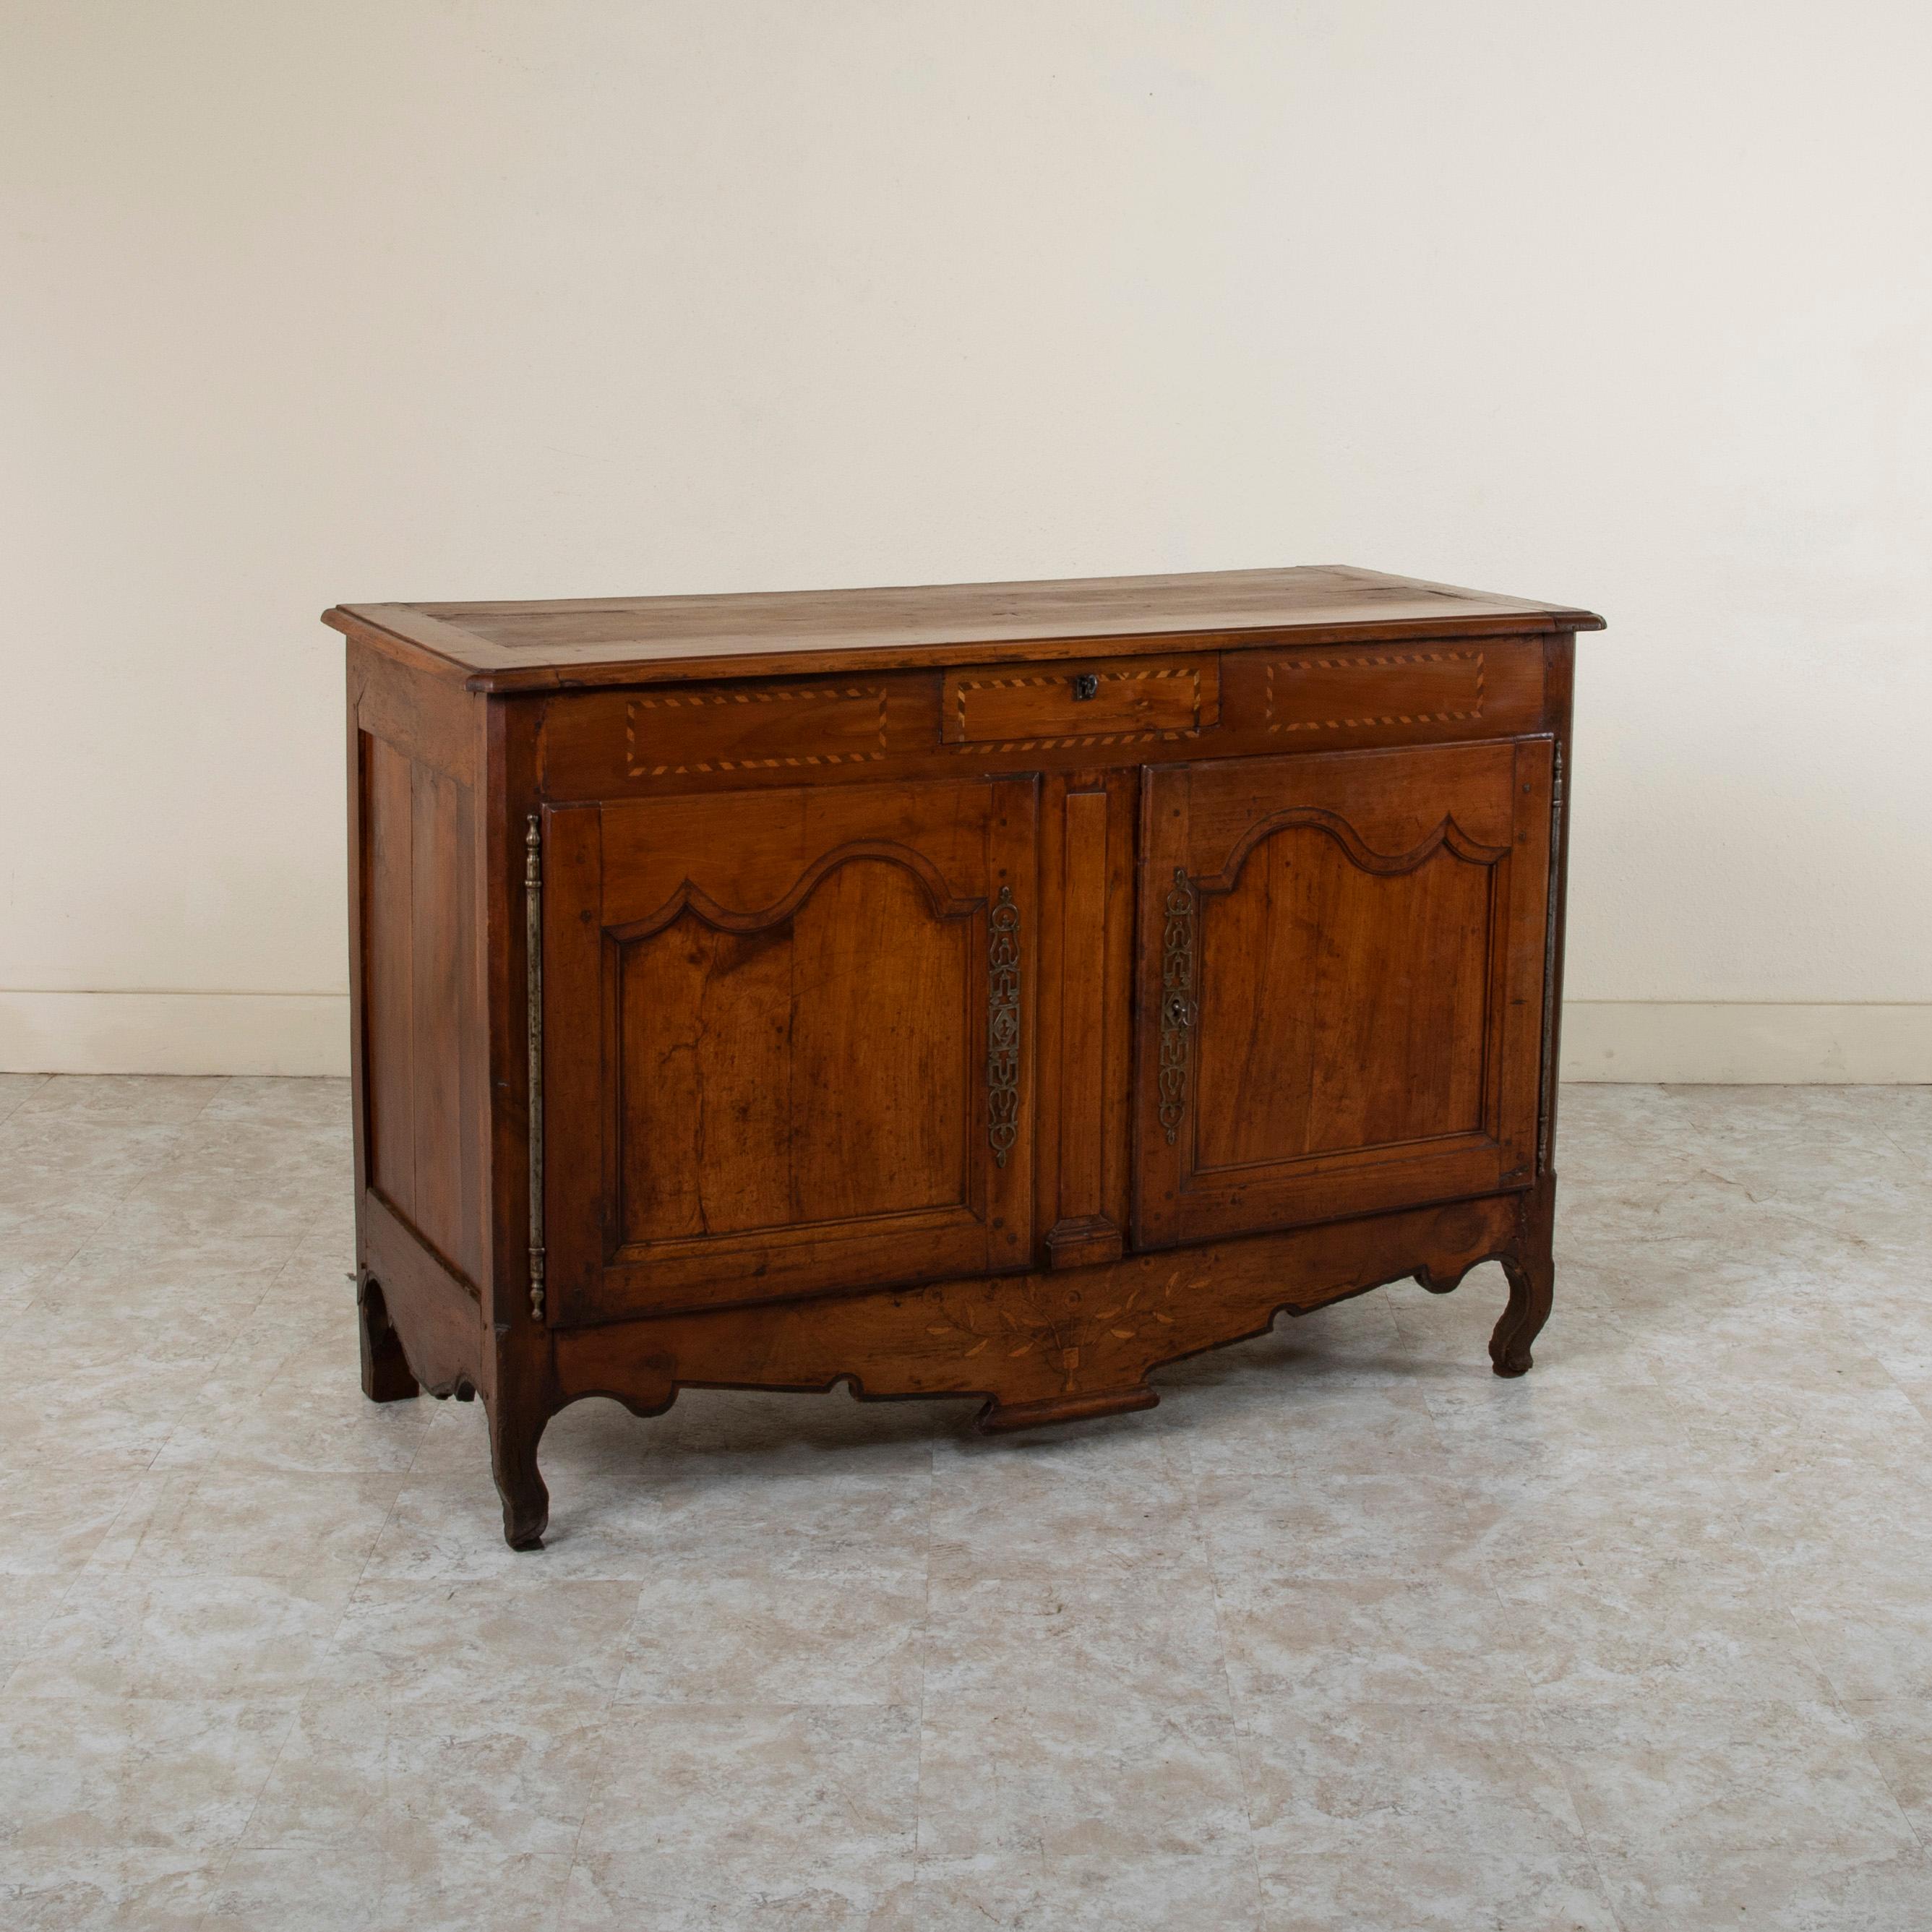 From the Dordogne region of France, this early nineteenth century walnut buffet features marquetry detailing of an urn with flowers on the lower apron and inset borders in a twisted ribbon pattern below the top. With hand pegged paneled sides, this